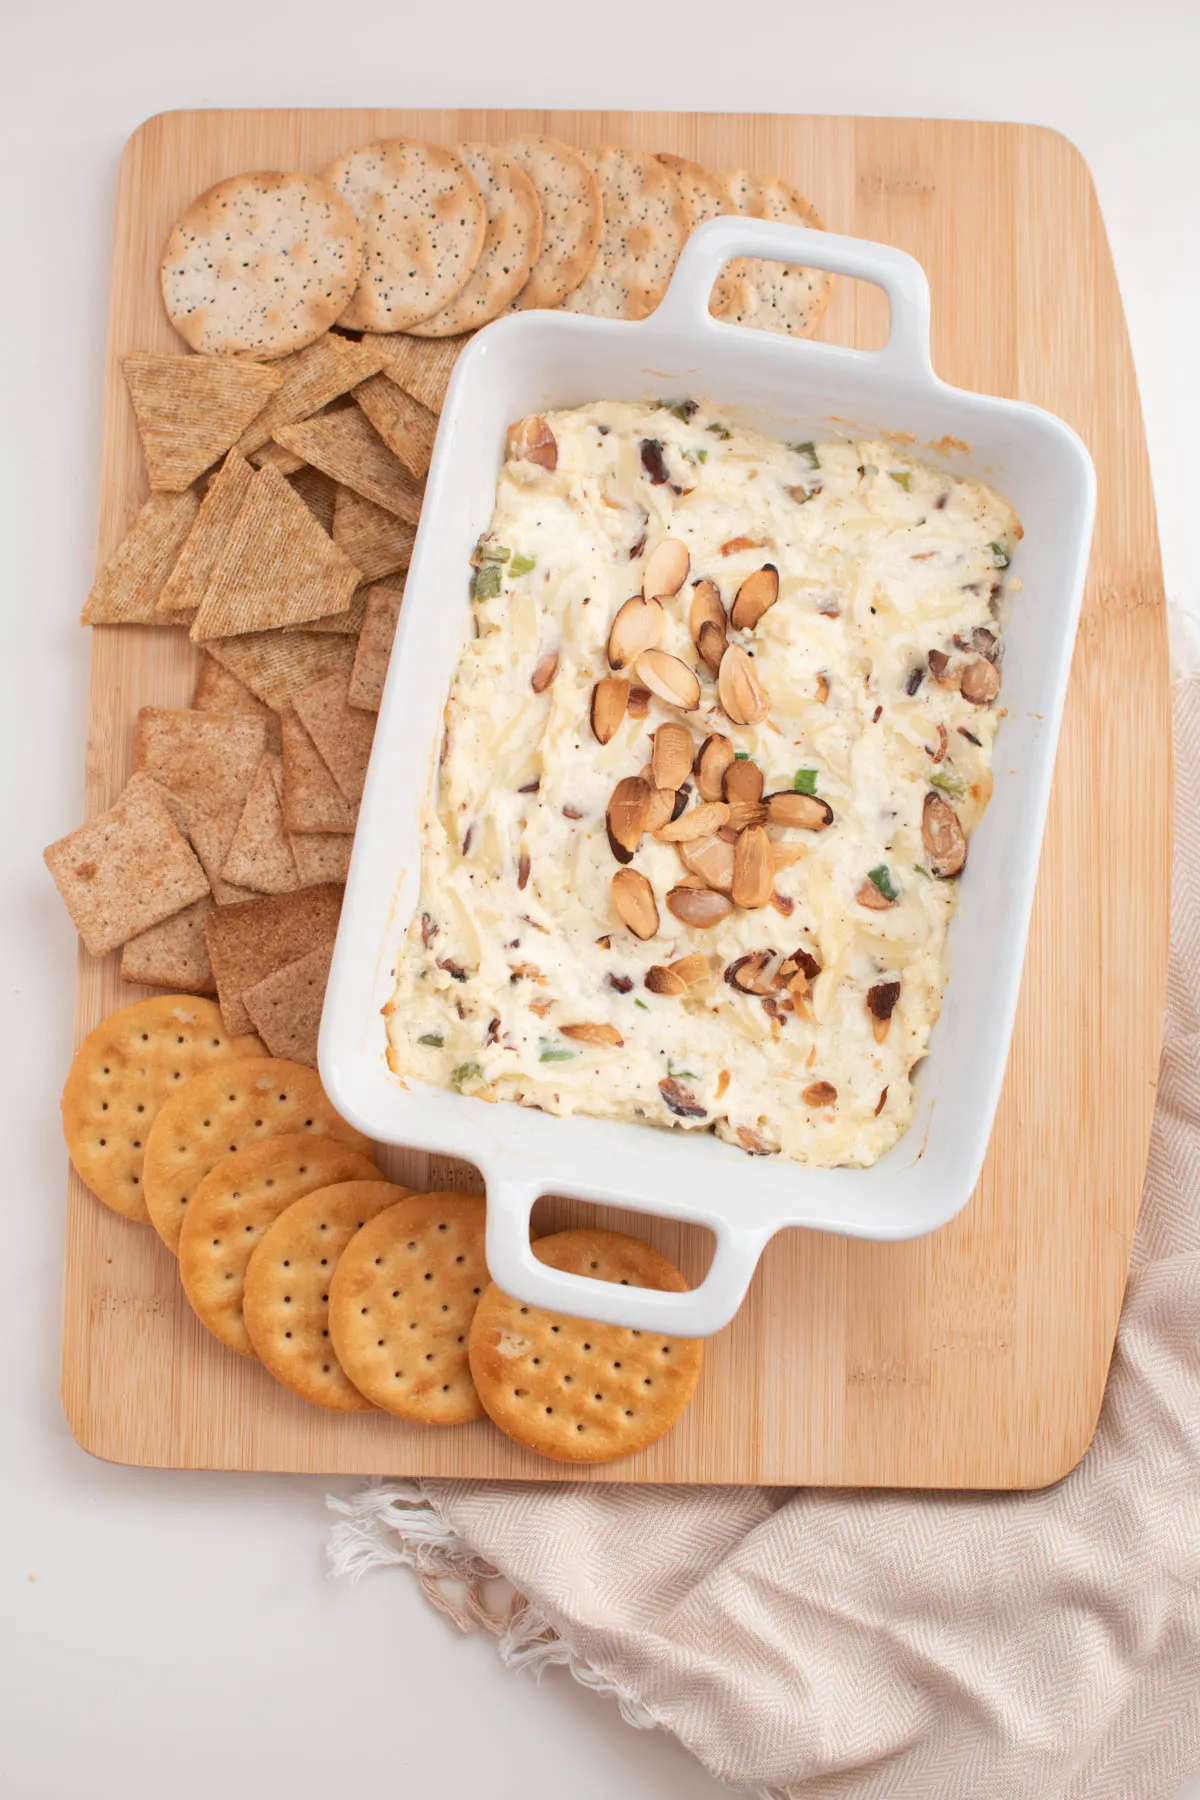 Hot almond Swiss dip in white baking dish and various crackers on wood cutting board.